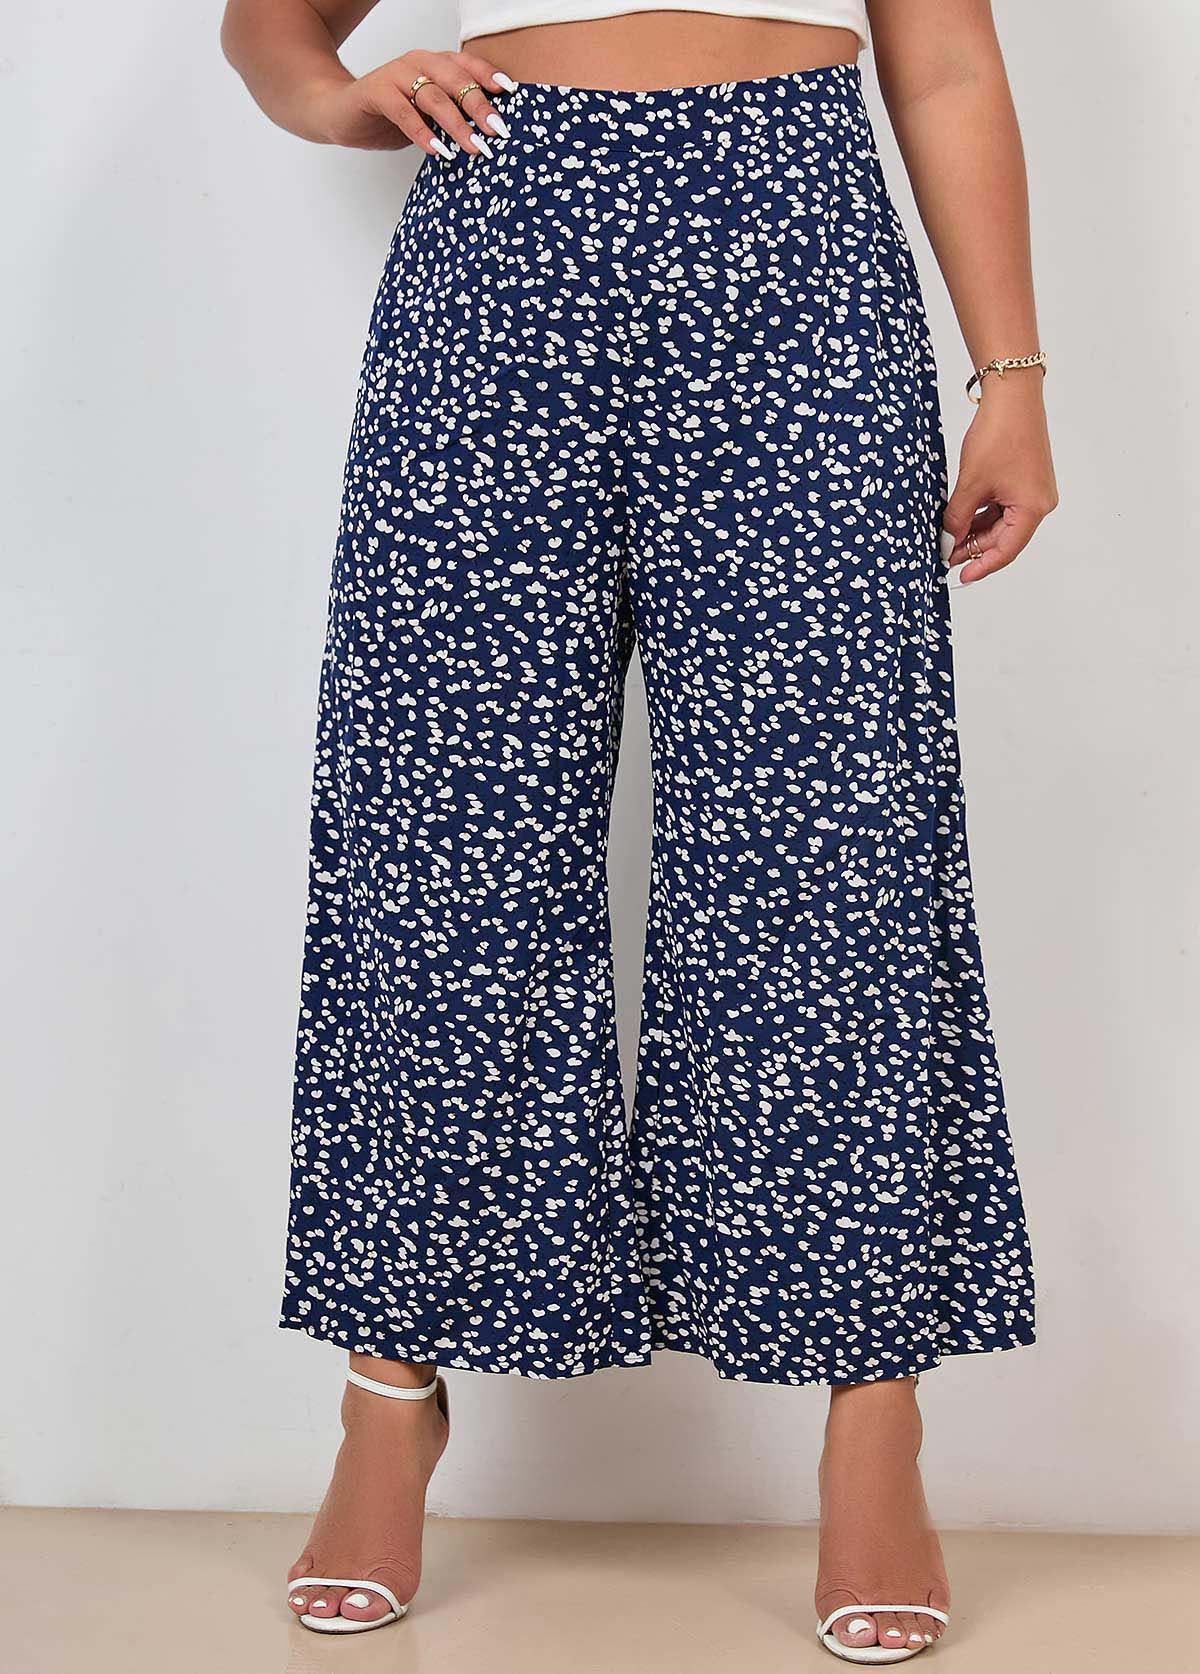 Plus Size High Waisted Navy Blue Pants